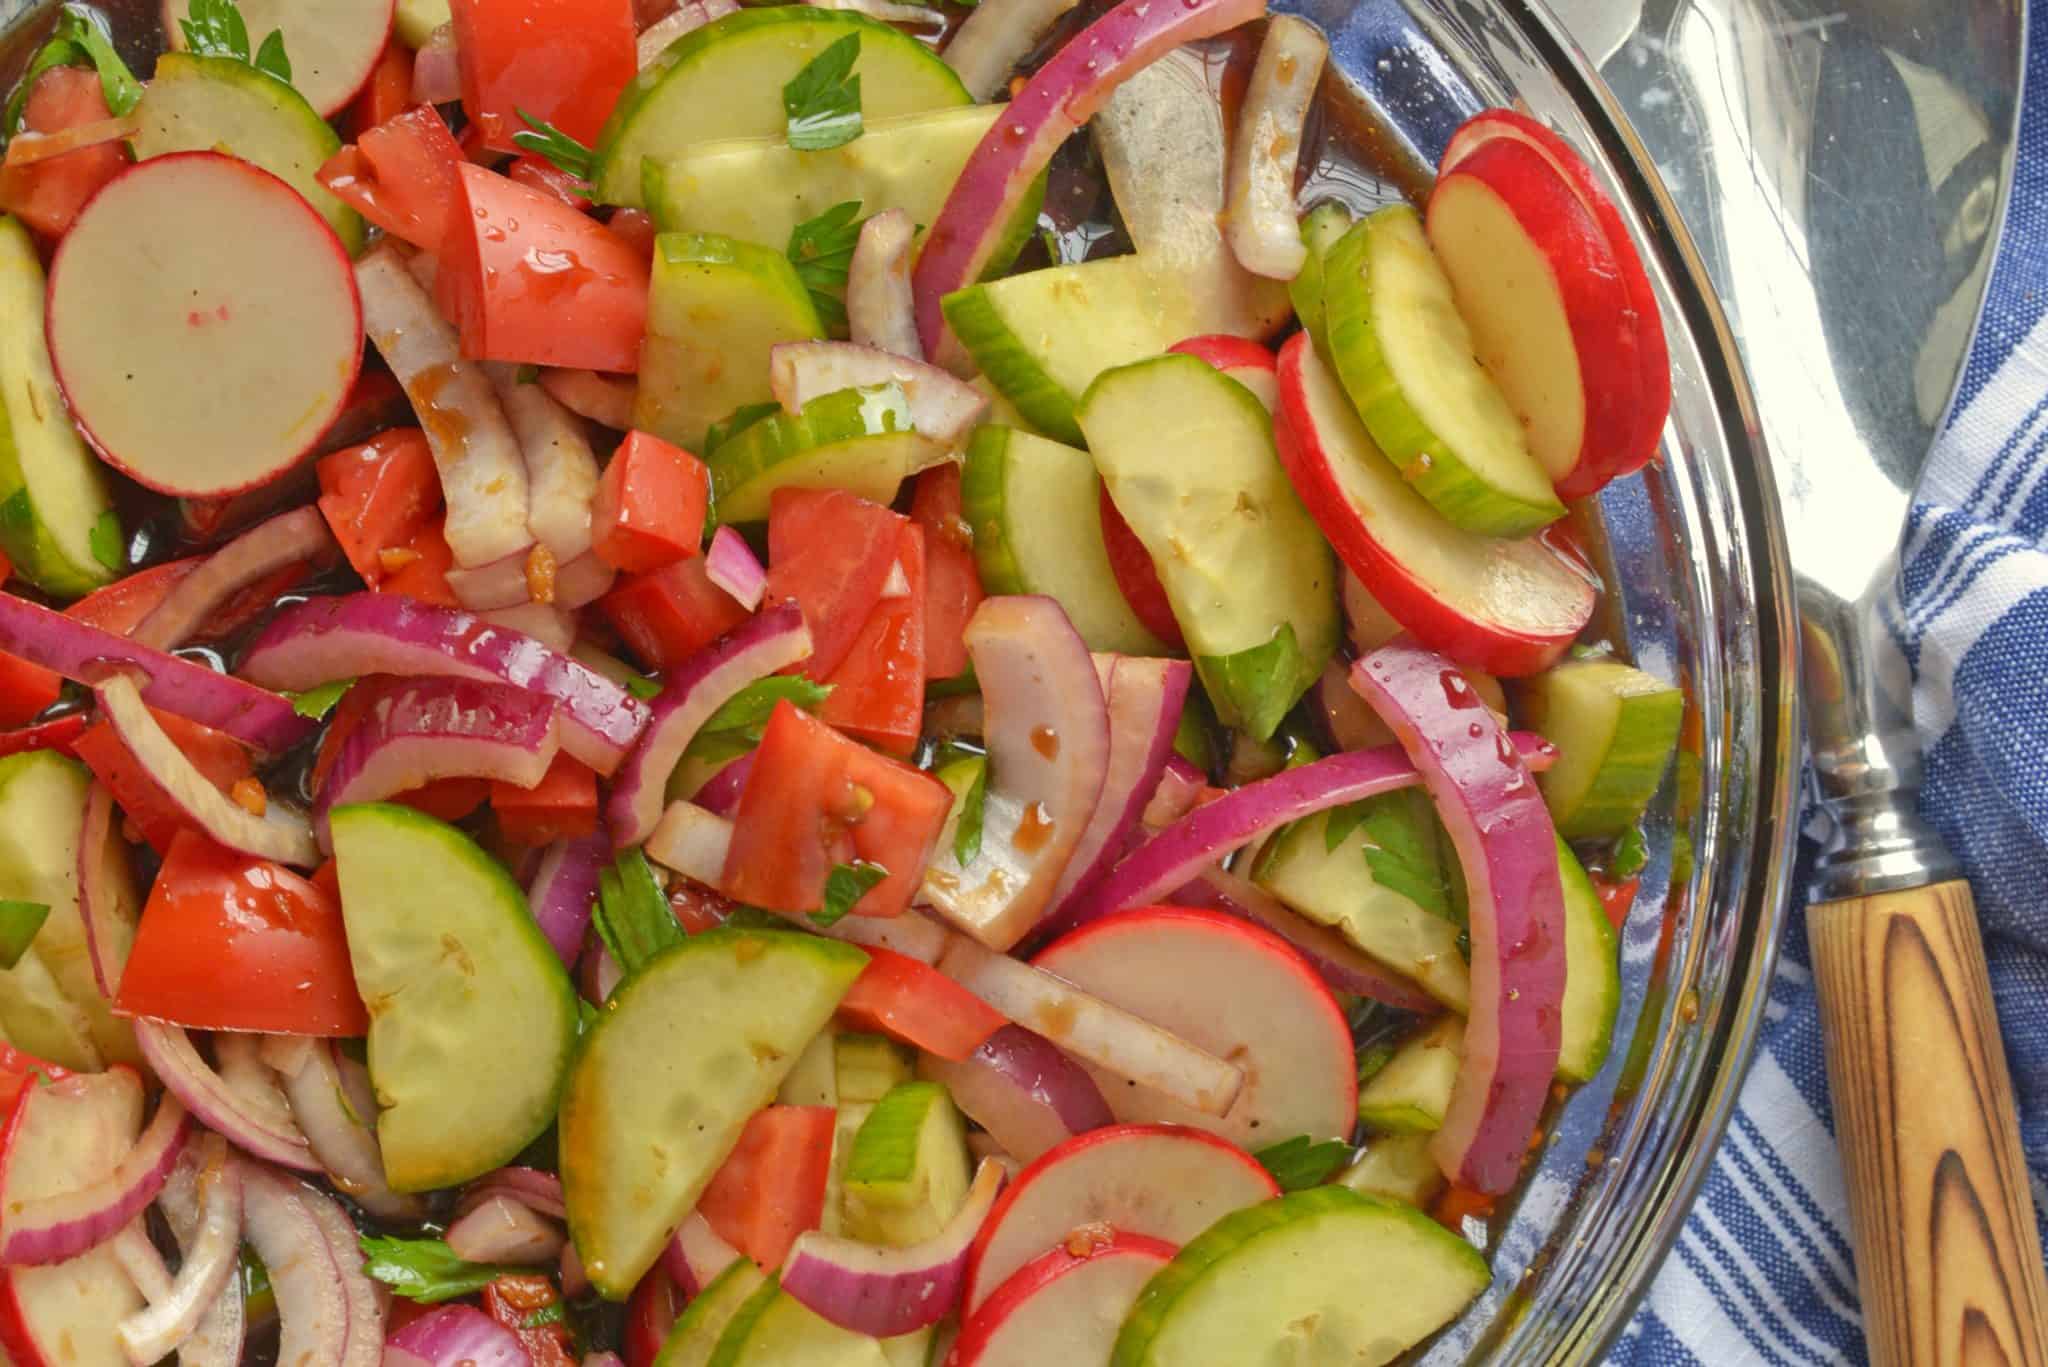 Fattoush Salad is of Arabic descent consisting of marinated vegetables, usually tomatoes and radishes, and tossed with grilled flatbread. #fattoushsalad www.savoryexperiments.com 